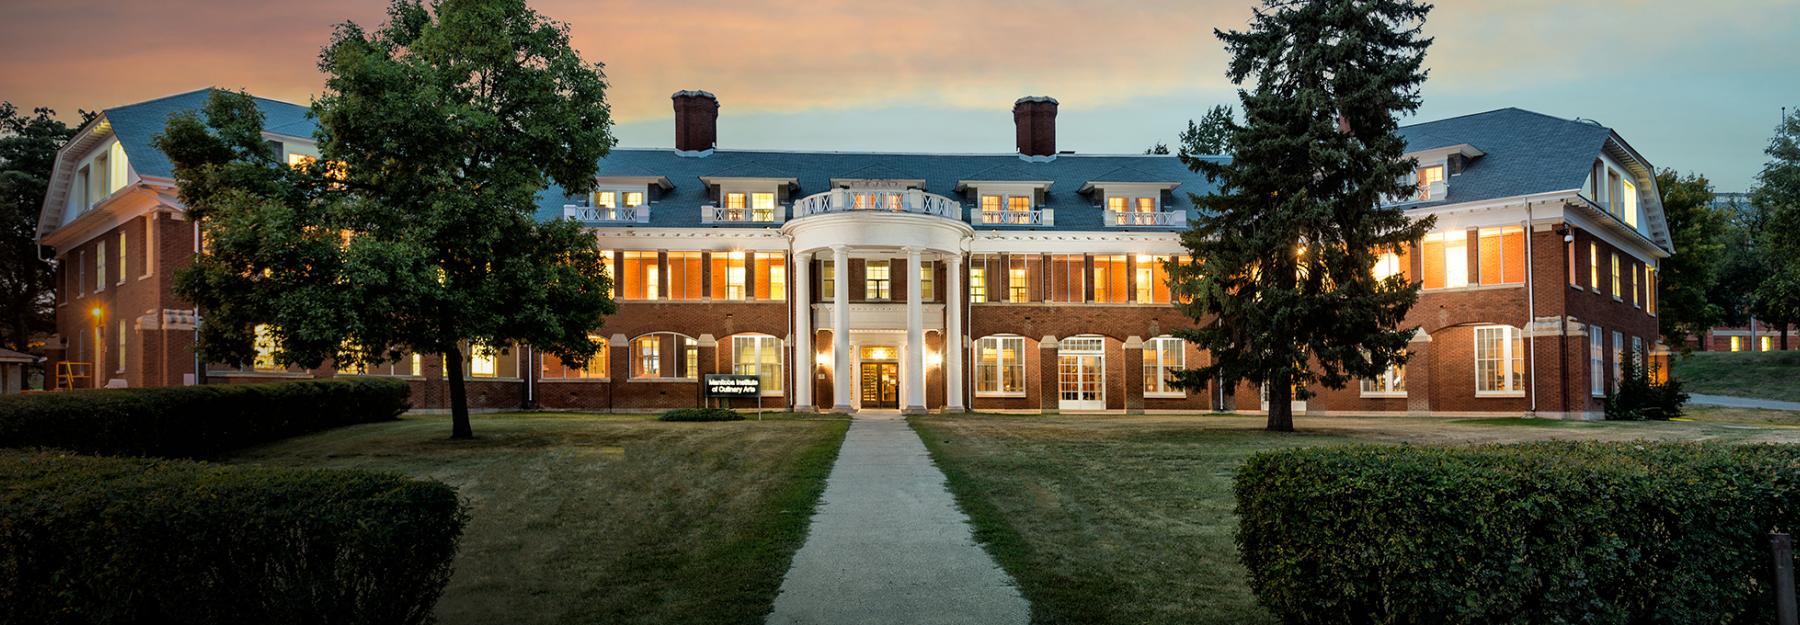 MICA building at the North Hill campus during sunset